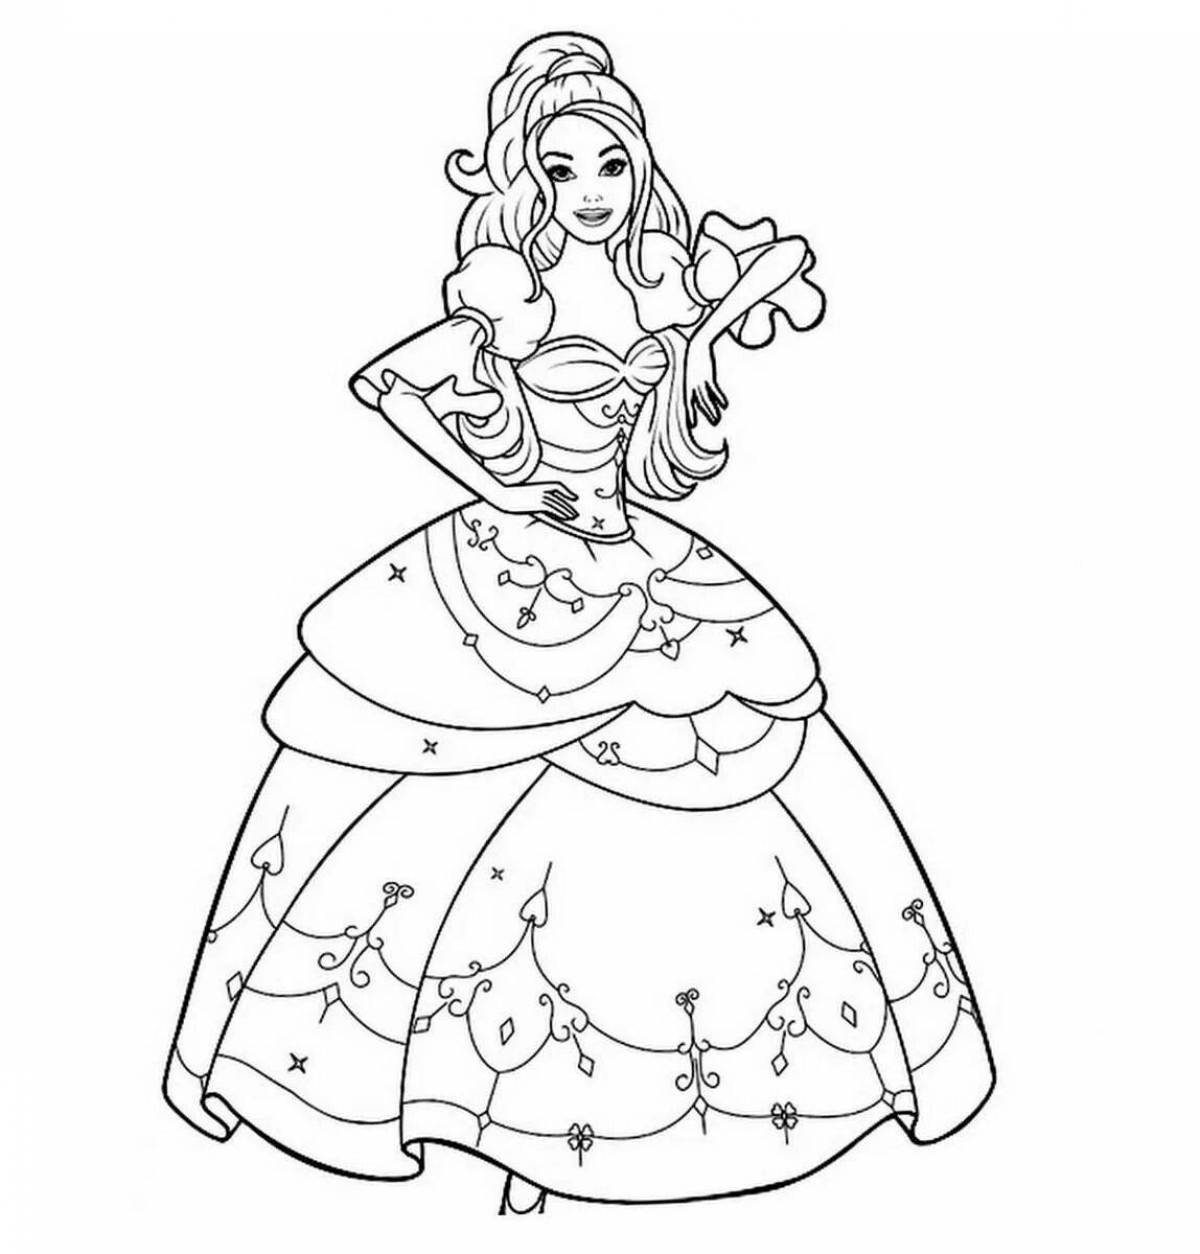 Gorgeous coloring book for girls lovely princesses